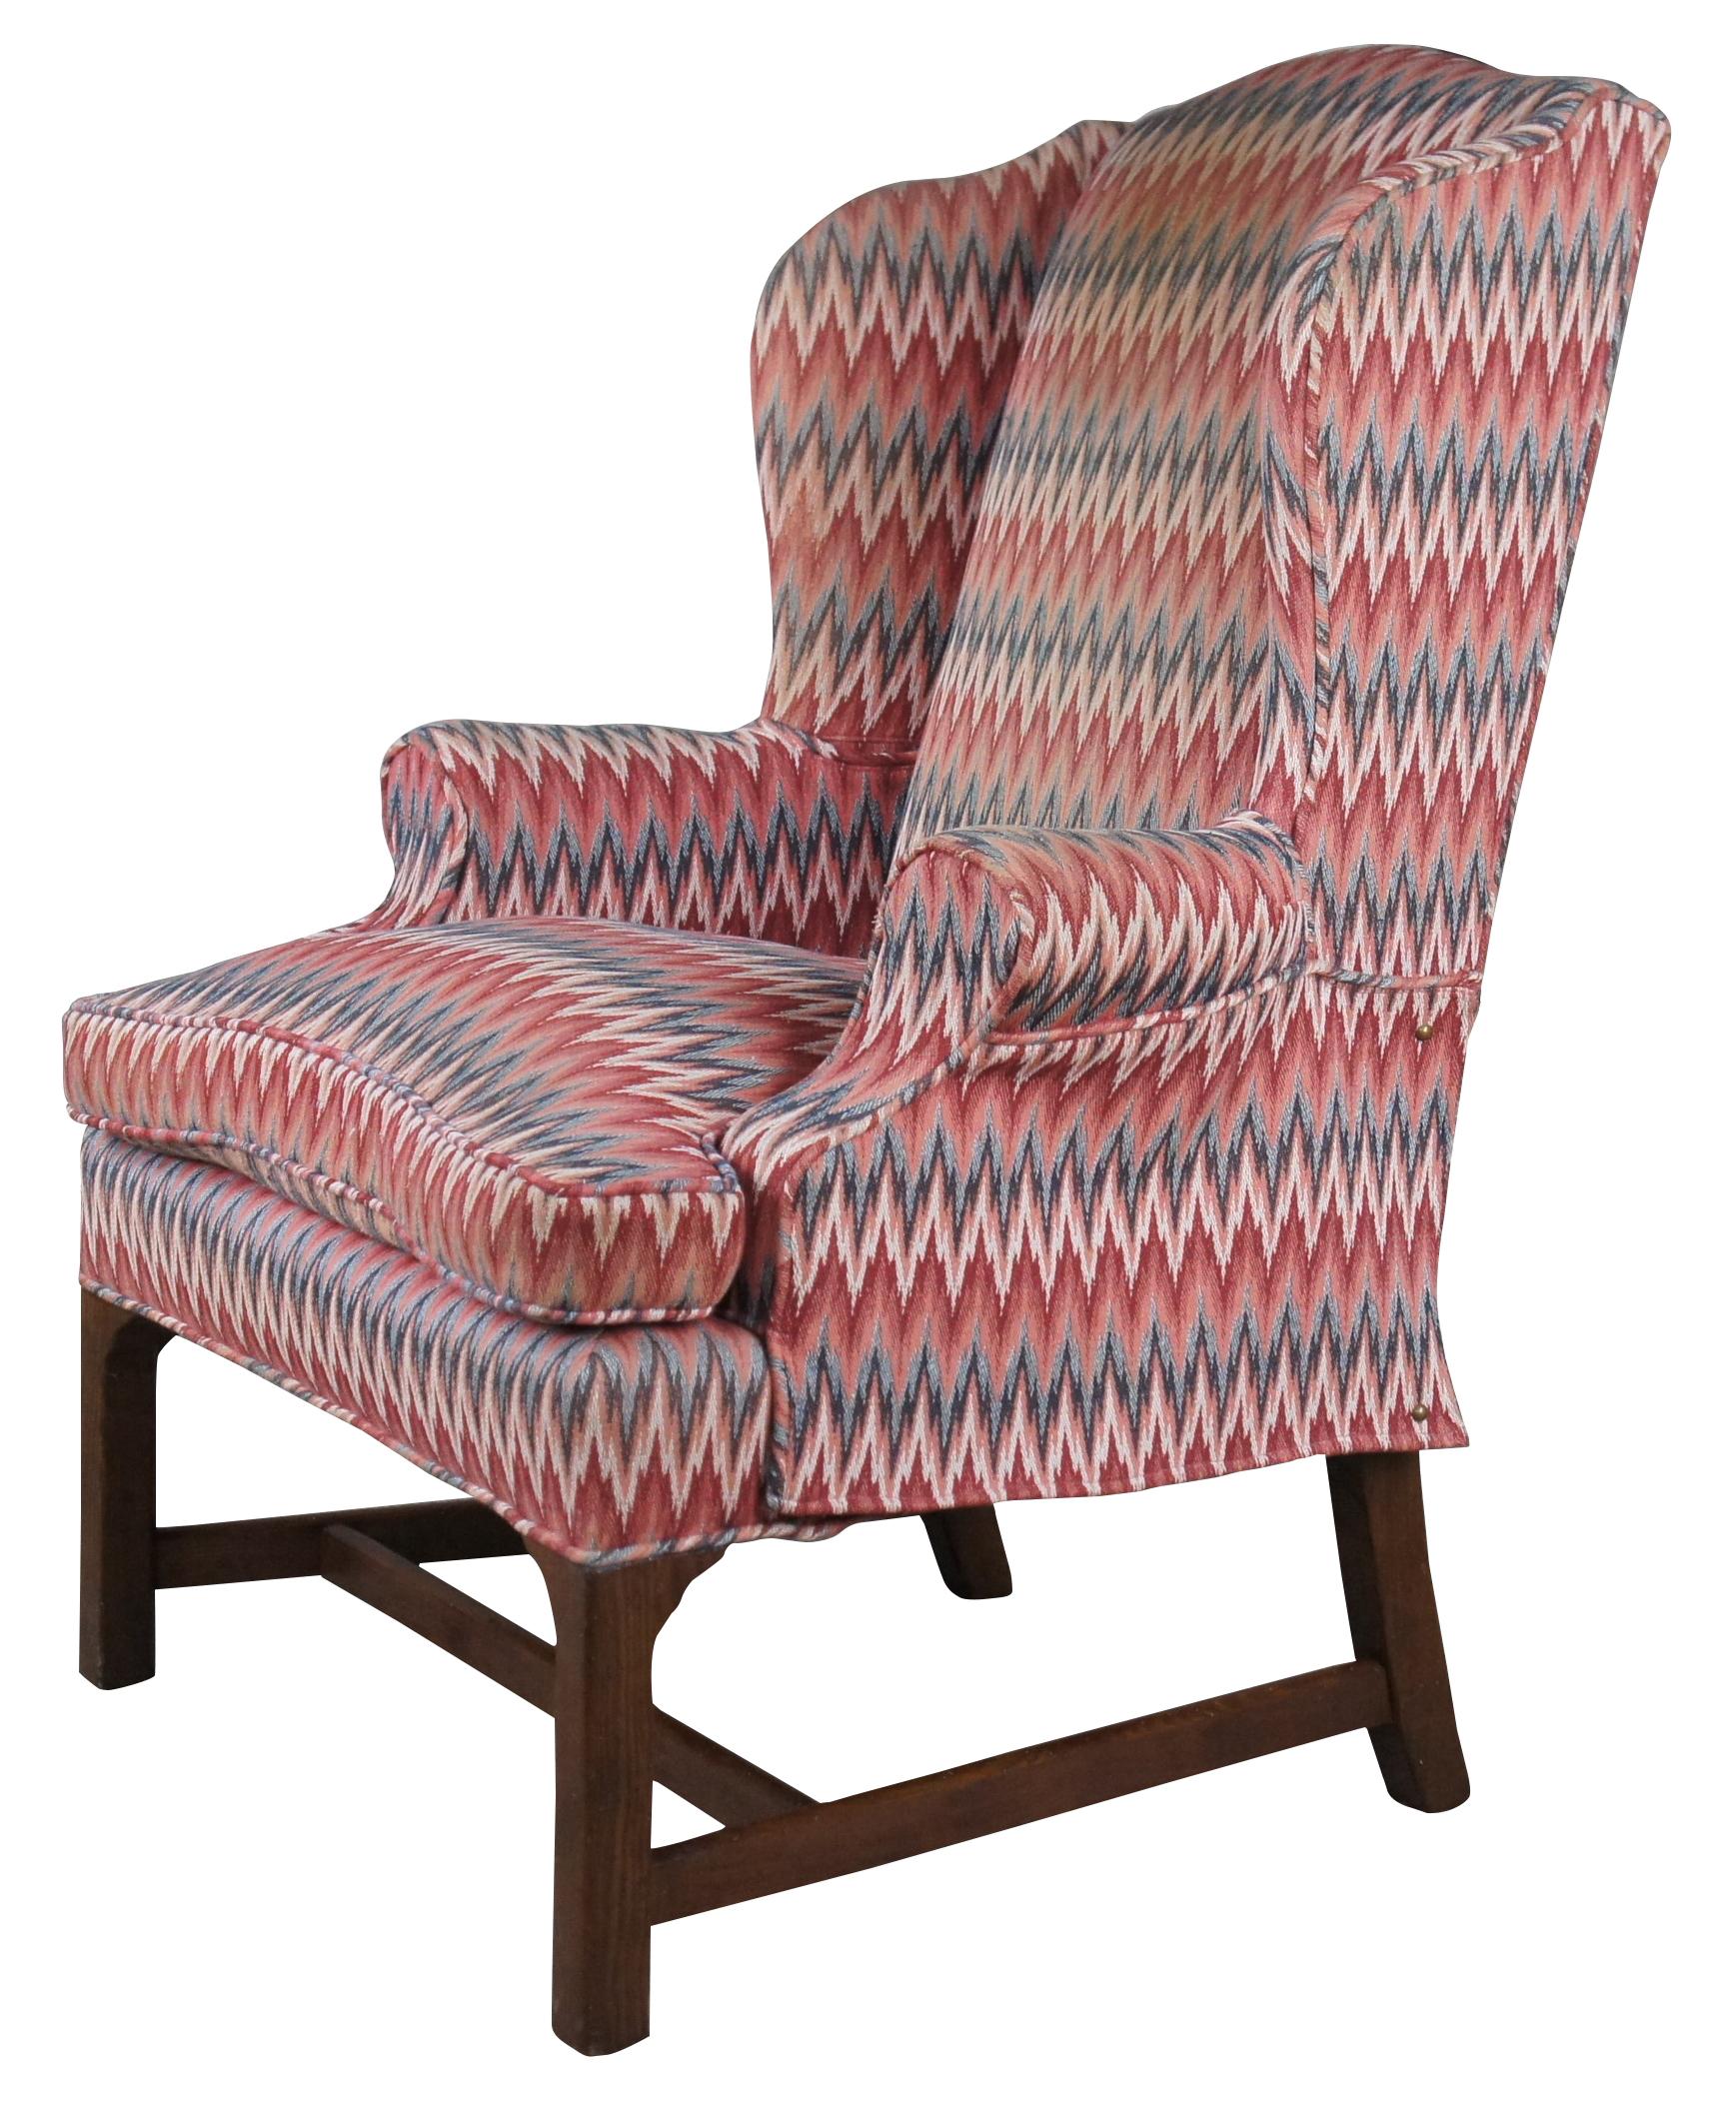 A beautiful traditional chippendale style wingback arm chair. Made from oak with a colorful chevron upholsterry and removable downfilled cushion. The chair features rolled arms and is supported by straight legs along the front connected to saber